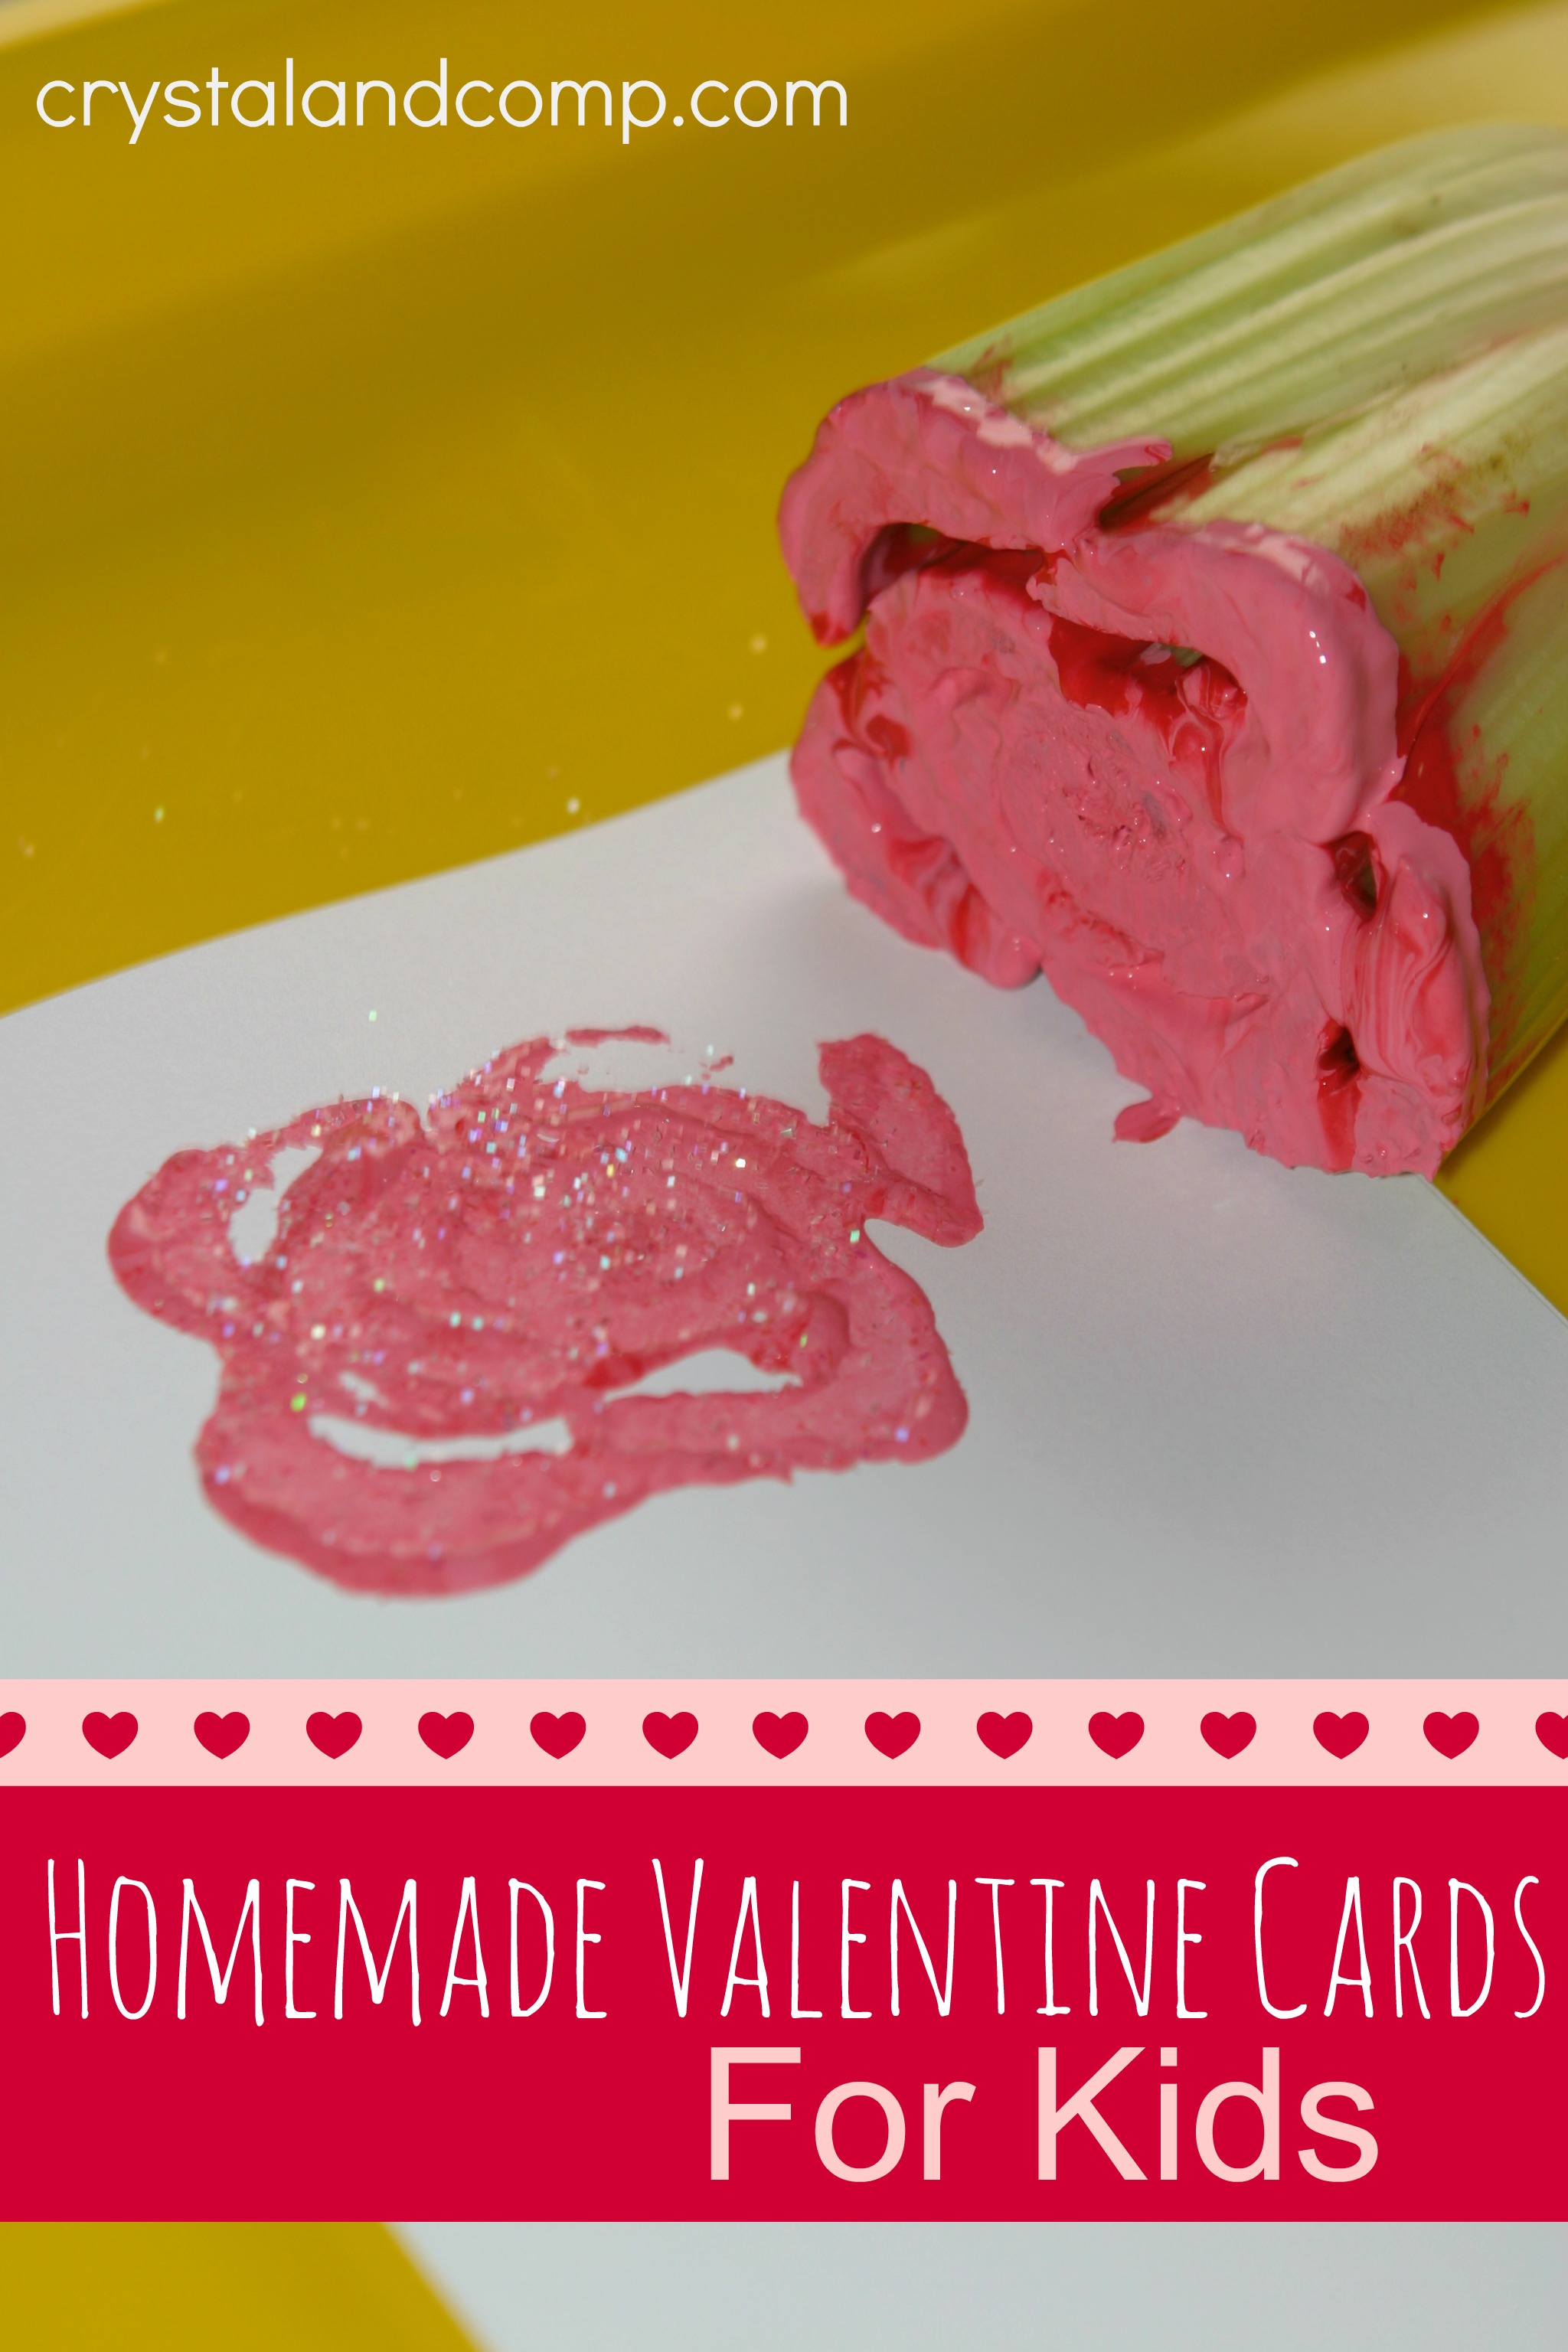 Homemade Valentine Cards for Kids2048 x 3072